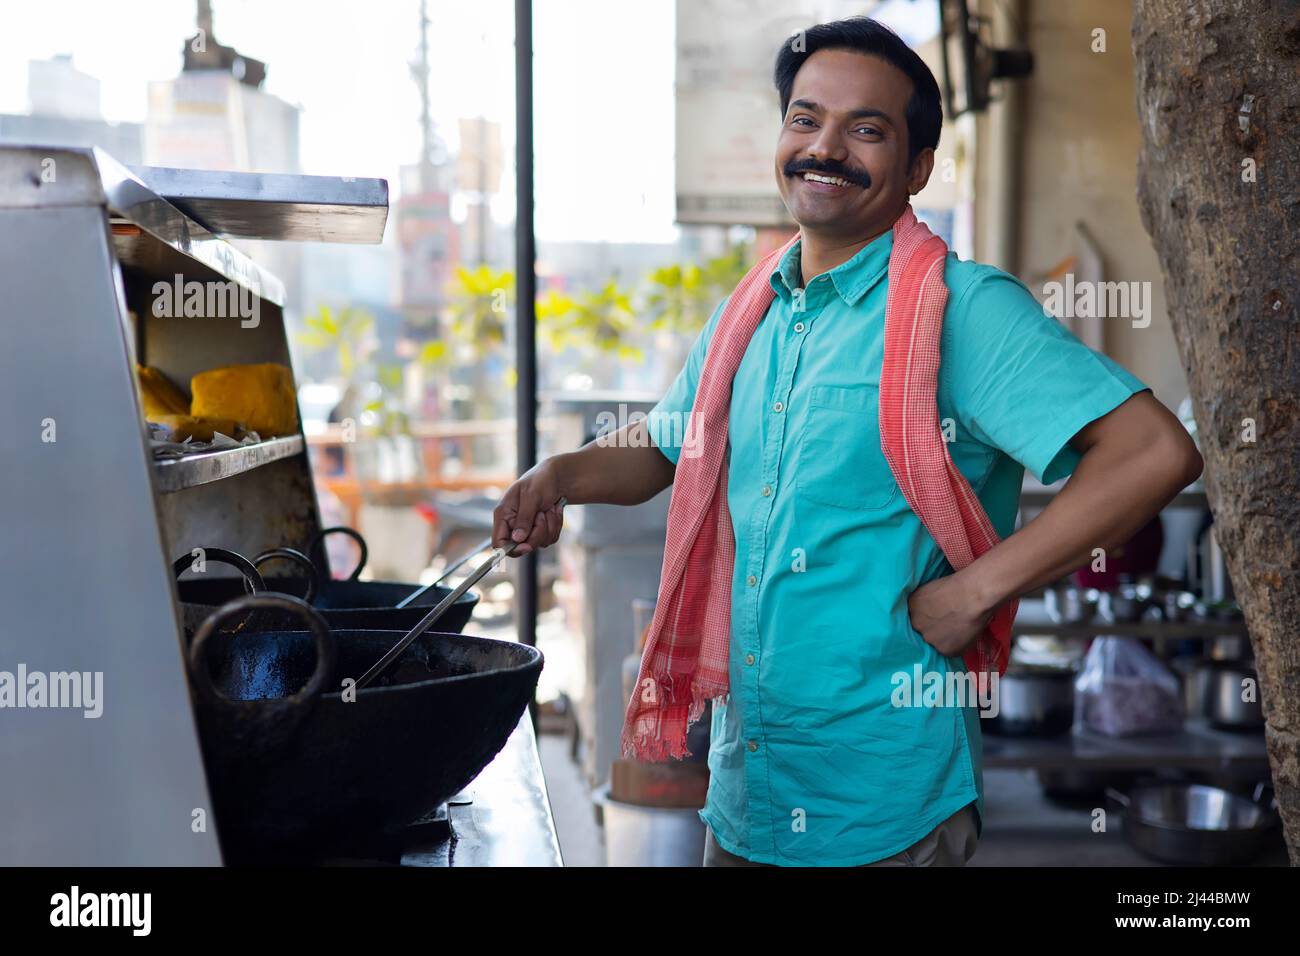 Street food vendor looking at camera with smile while making food at a stall Stock Photo